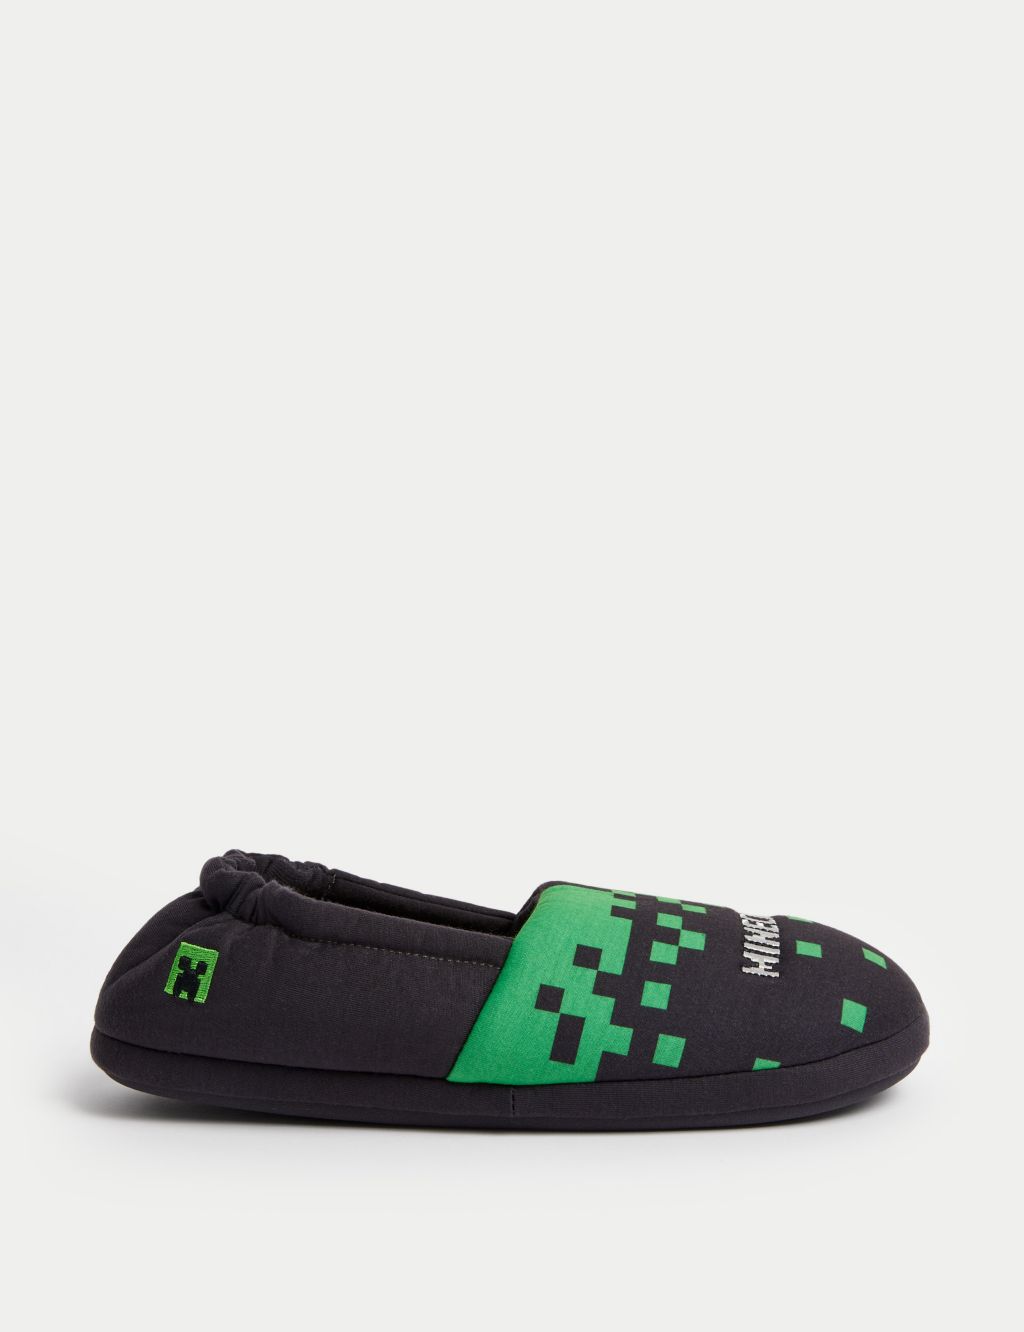 Kids' Minecraft™ Slippers (13 Small - 7 Large) image 1